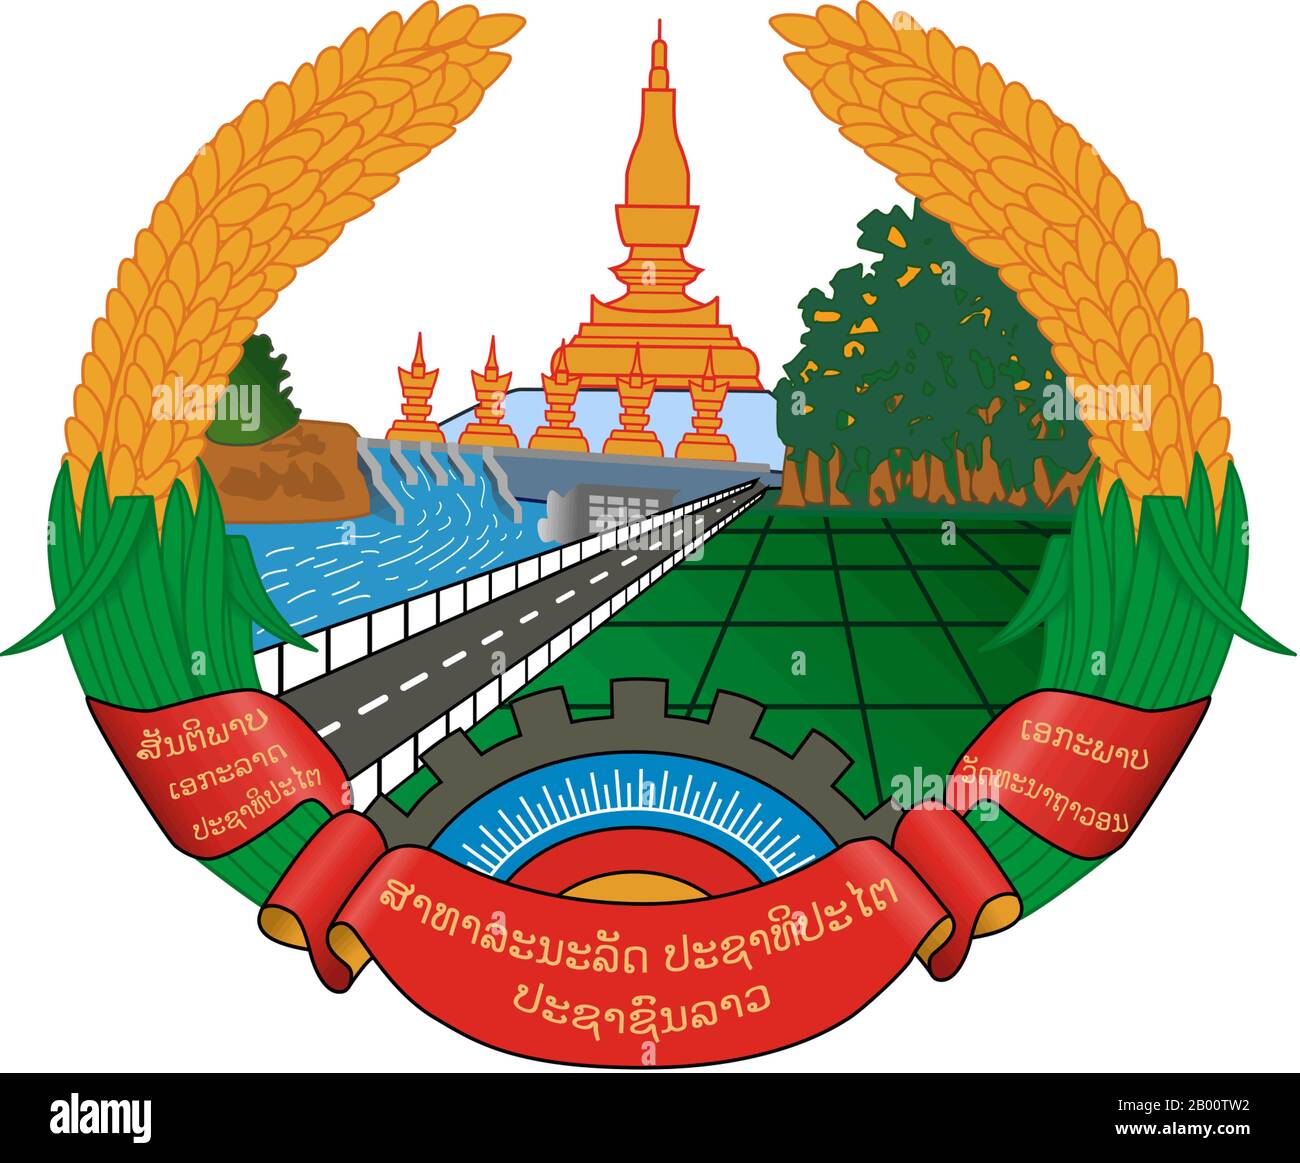 Laos: Coat of Arms of the Lao People's Democratic Republic.  The kingdom of Laos existed from the 14th to the 18th centuries, then split into three separate kingdoms.   In 1893, it became a French protectorate, with the three kingdoms—Luang Prabang, Vientiane and Champasak—uniting to form what is now known as Laos. The country briefly gained independence in 1945 after Japanese occupation, but returned to French rule until it was granted autonomy in 1949.   Laos became independent in 1954, with a constitutional monarchy under King Sisavang Vong; a long civil war soon broke out however. Stock Photo